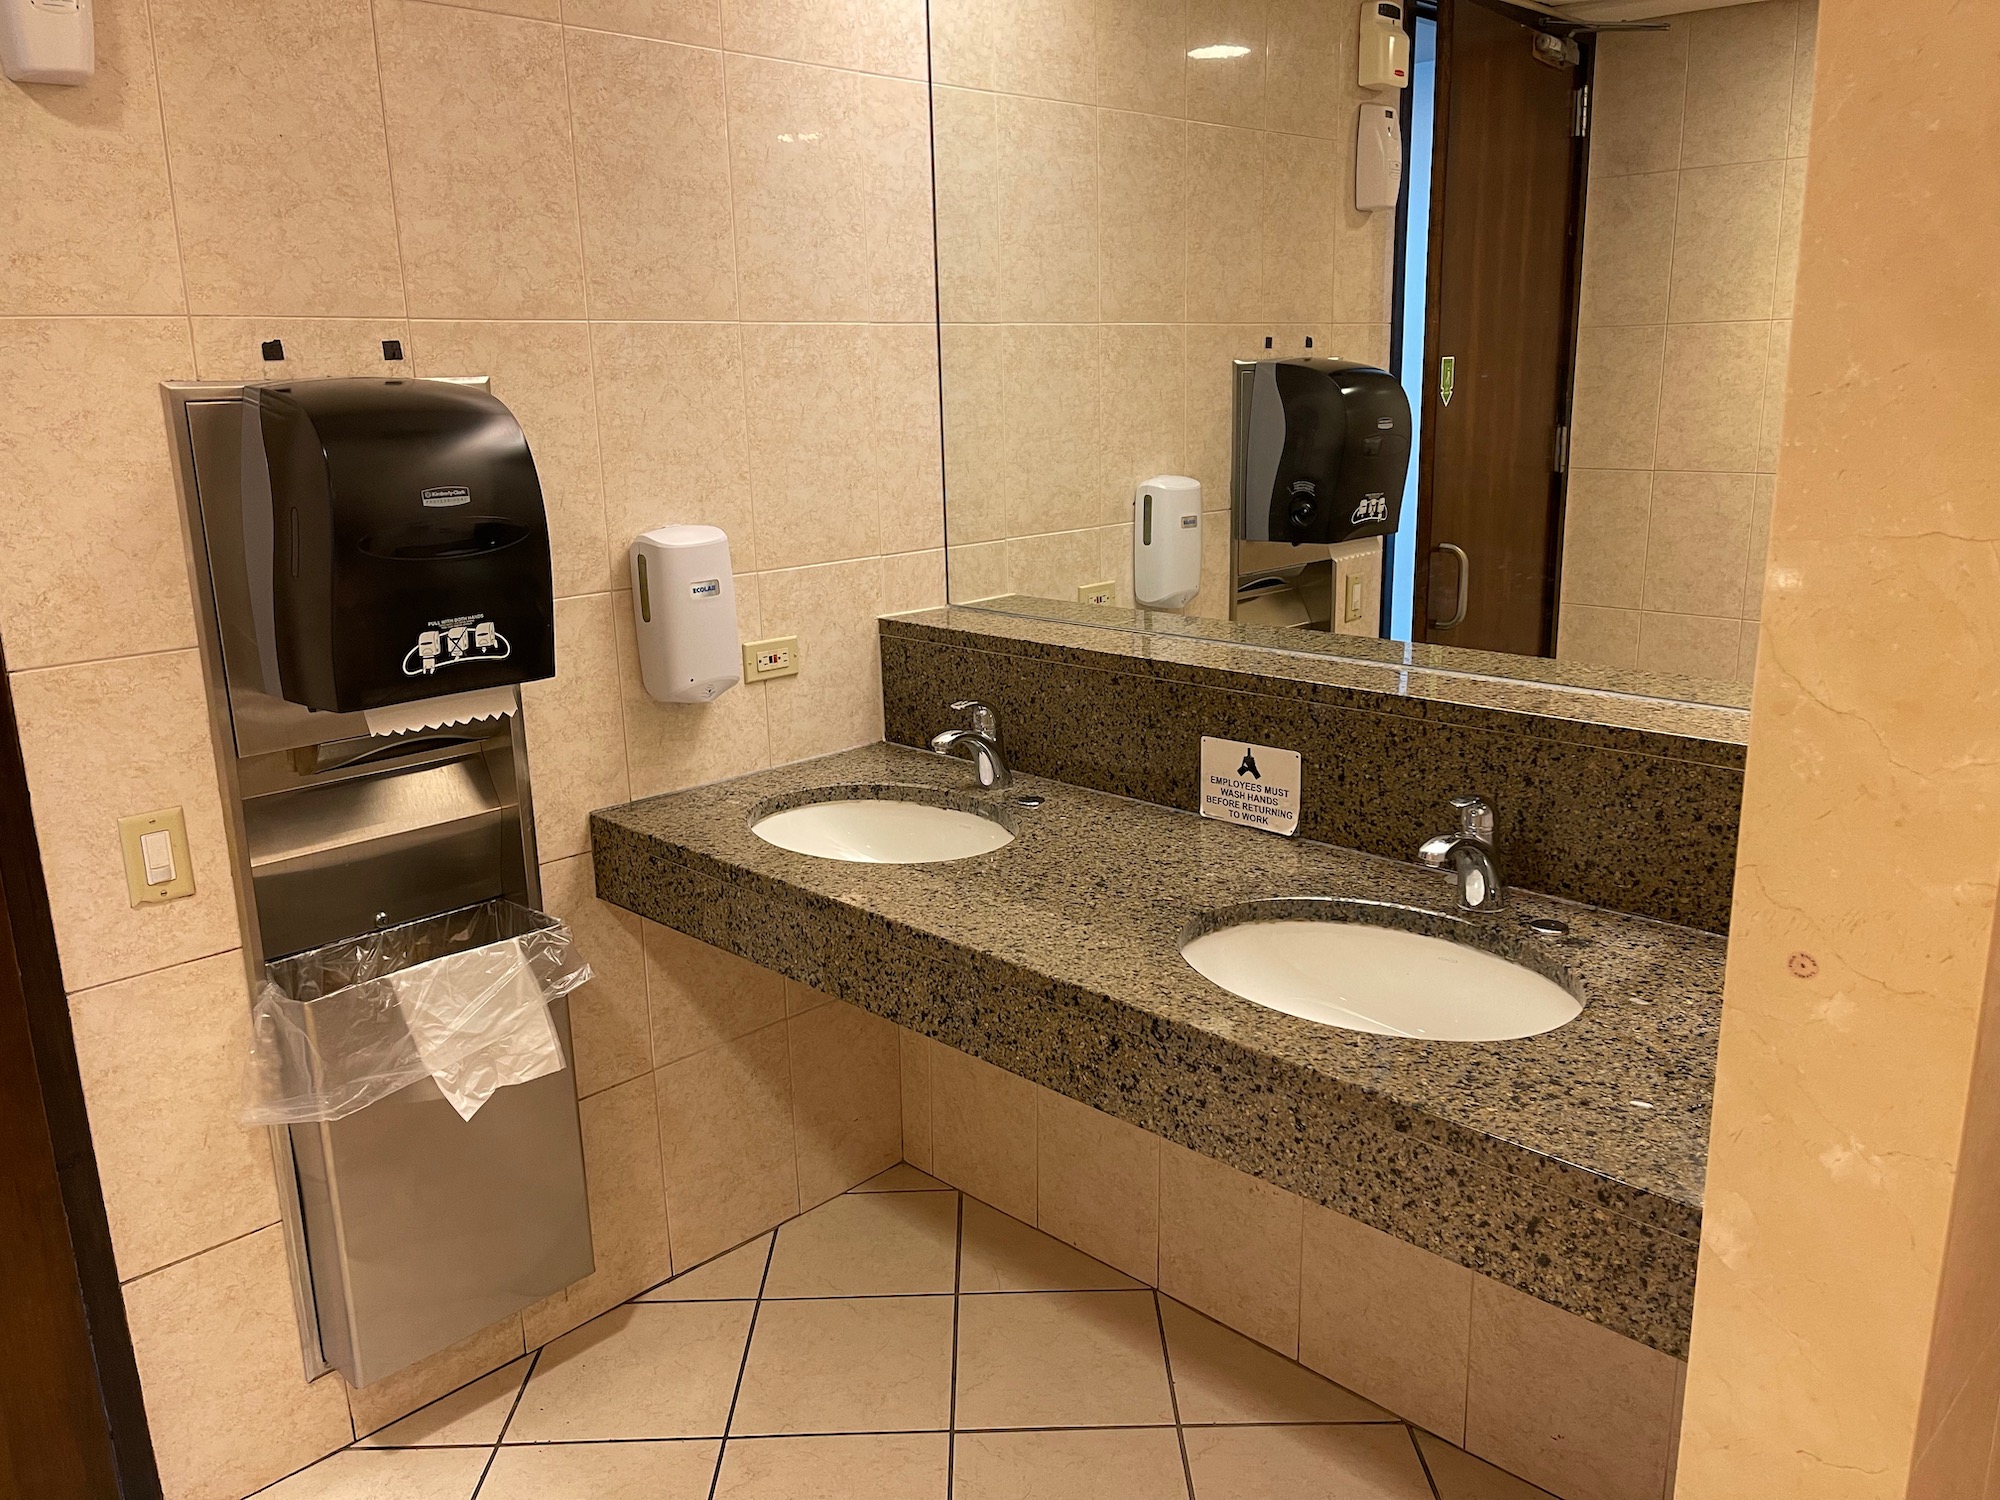 a bathroom with sinks and soap dispensers